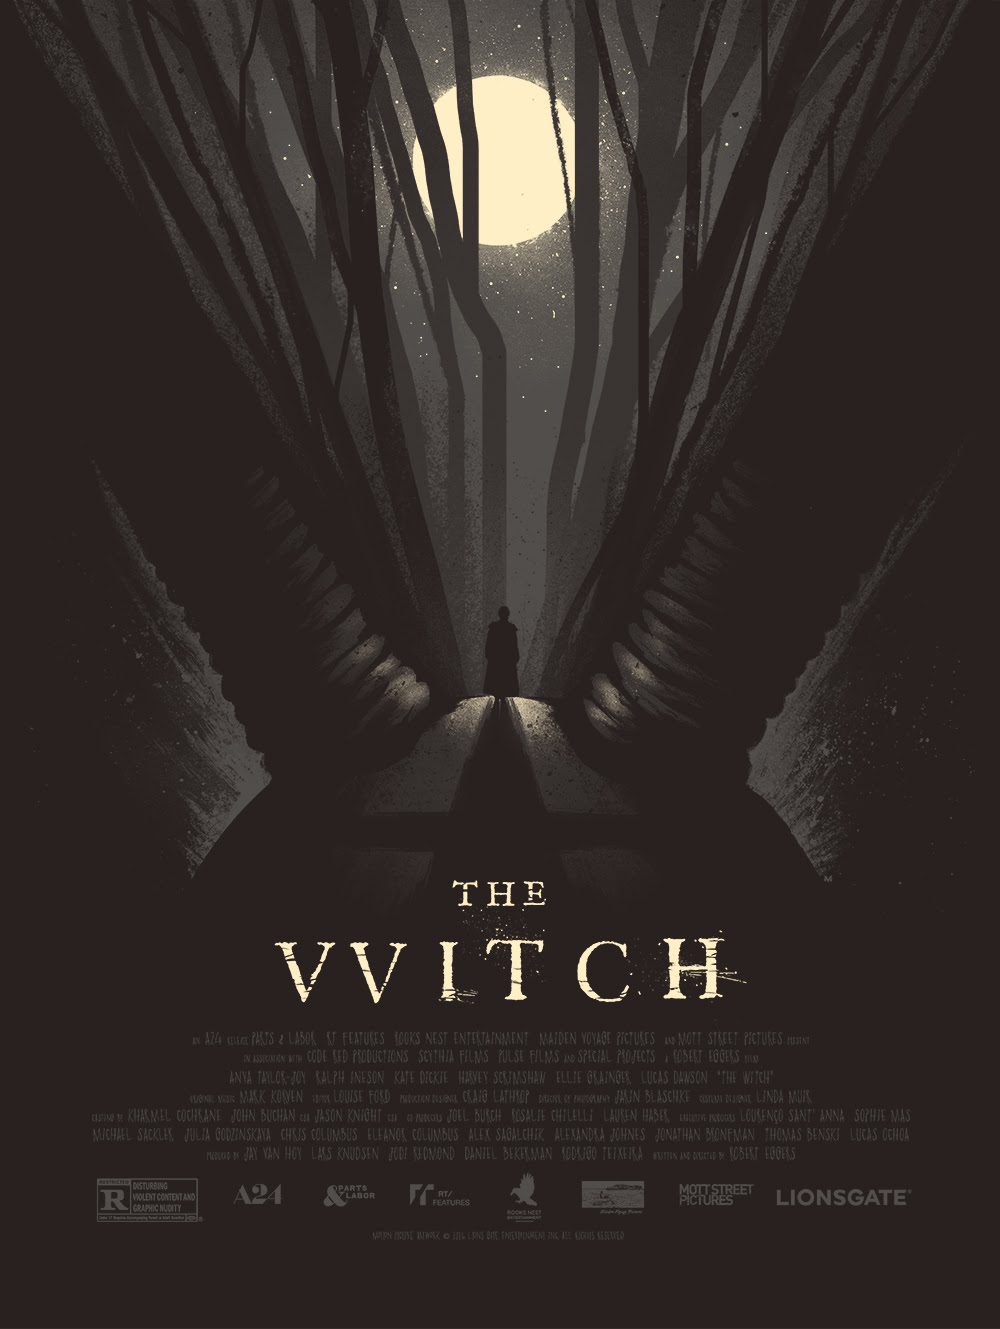 David-Moscati-The-Witch-Movie-Poster-2016-Hero-Complex-Gallery